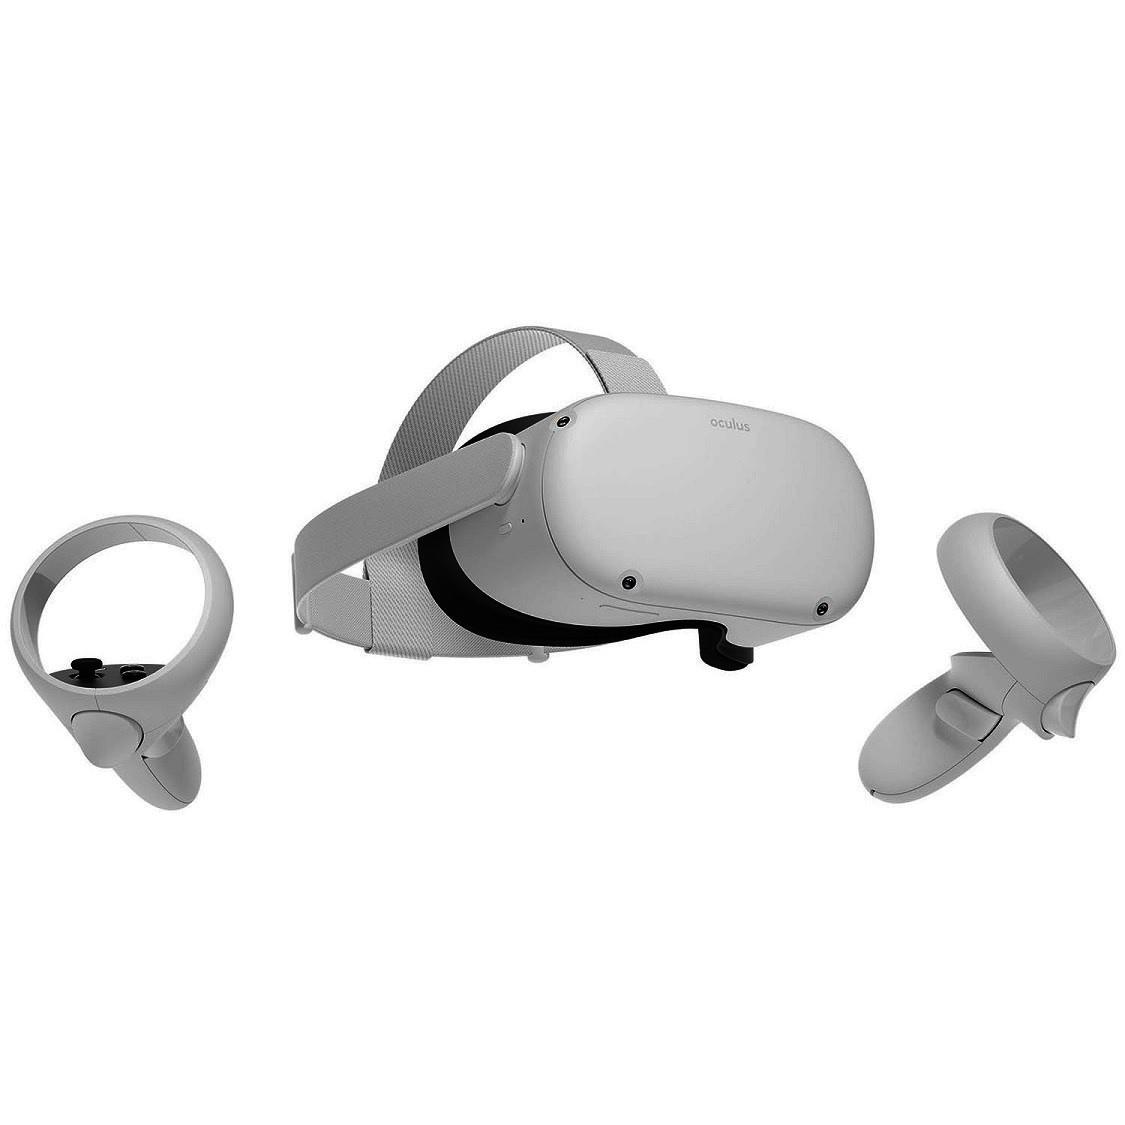 Meta Quest 3 Advanced All-in-One VR Headset (128GB)